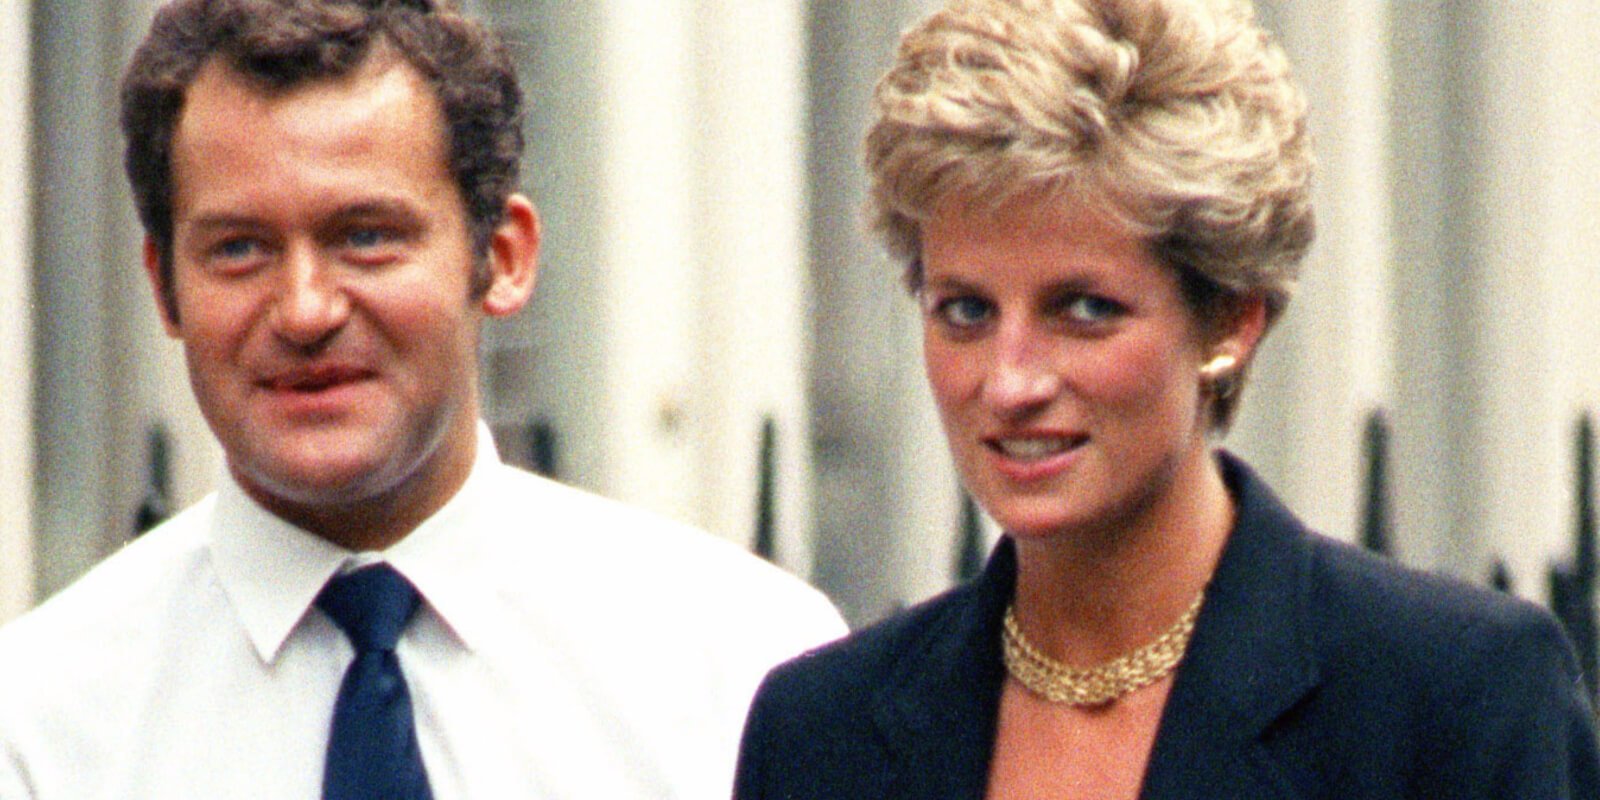 Princess Diana and her butler Paul Burrell photographed in 1994.